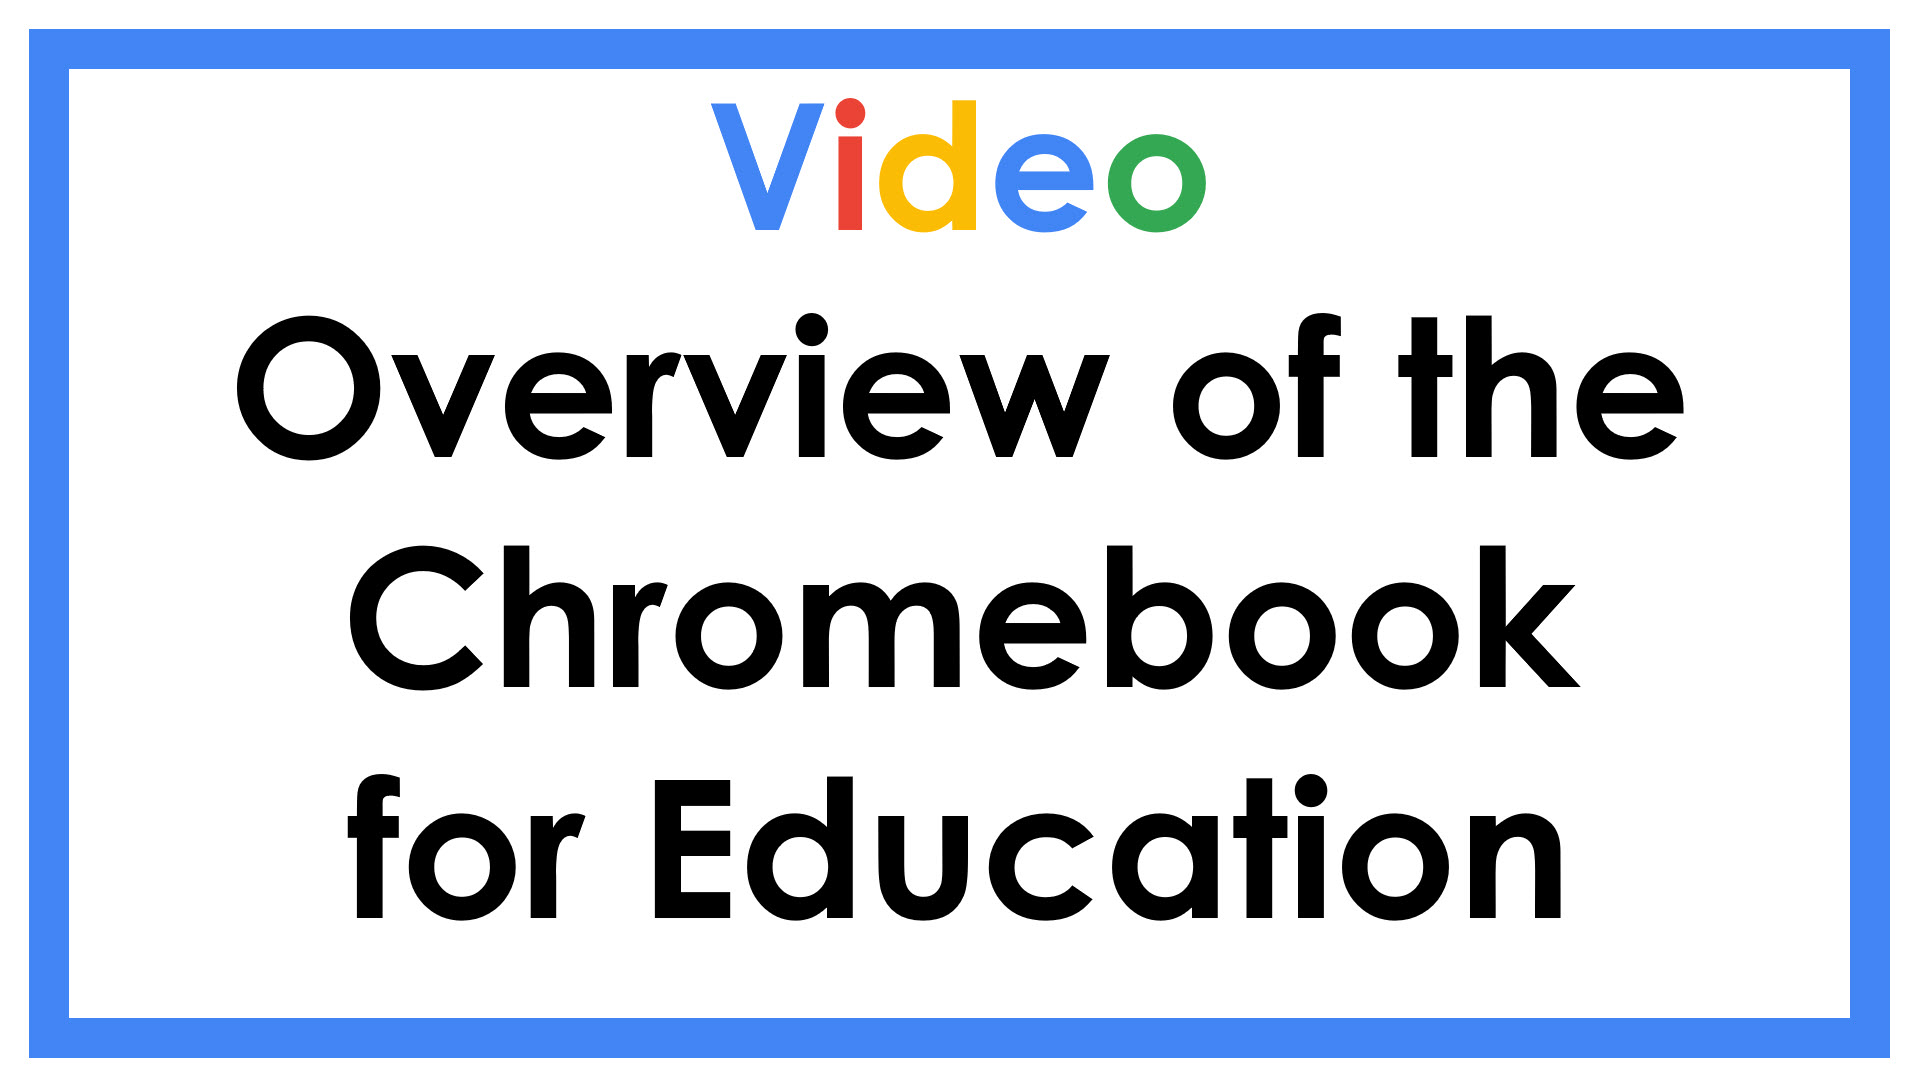 Video Overview of the Chromebook for Education